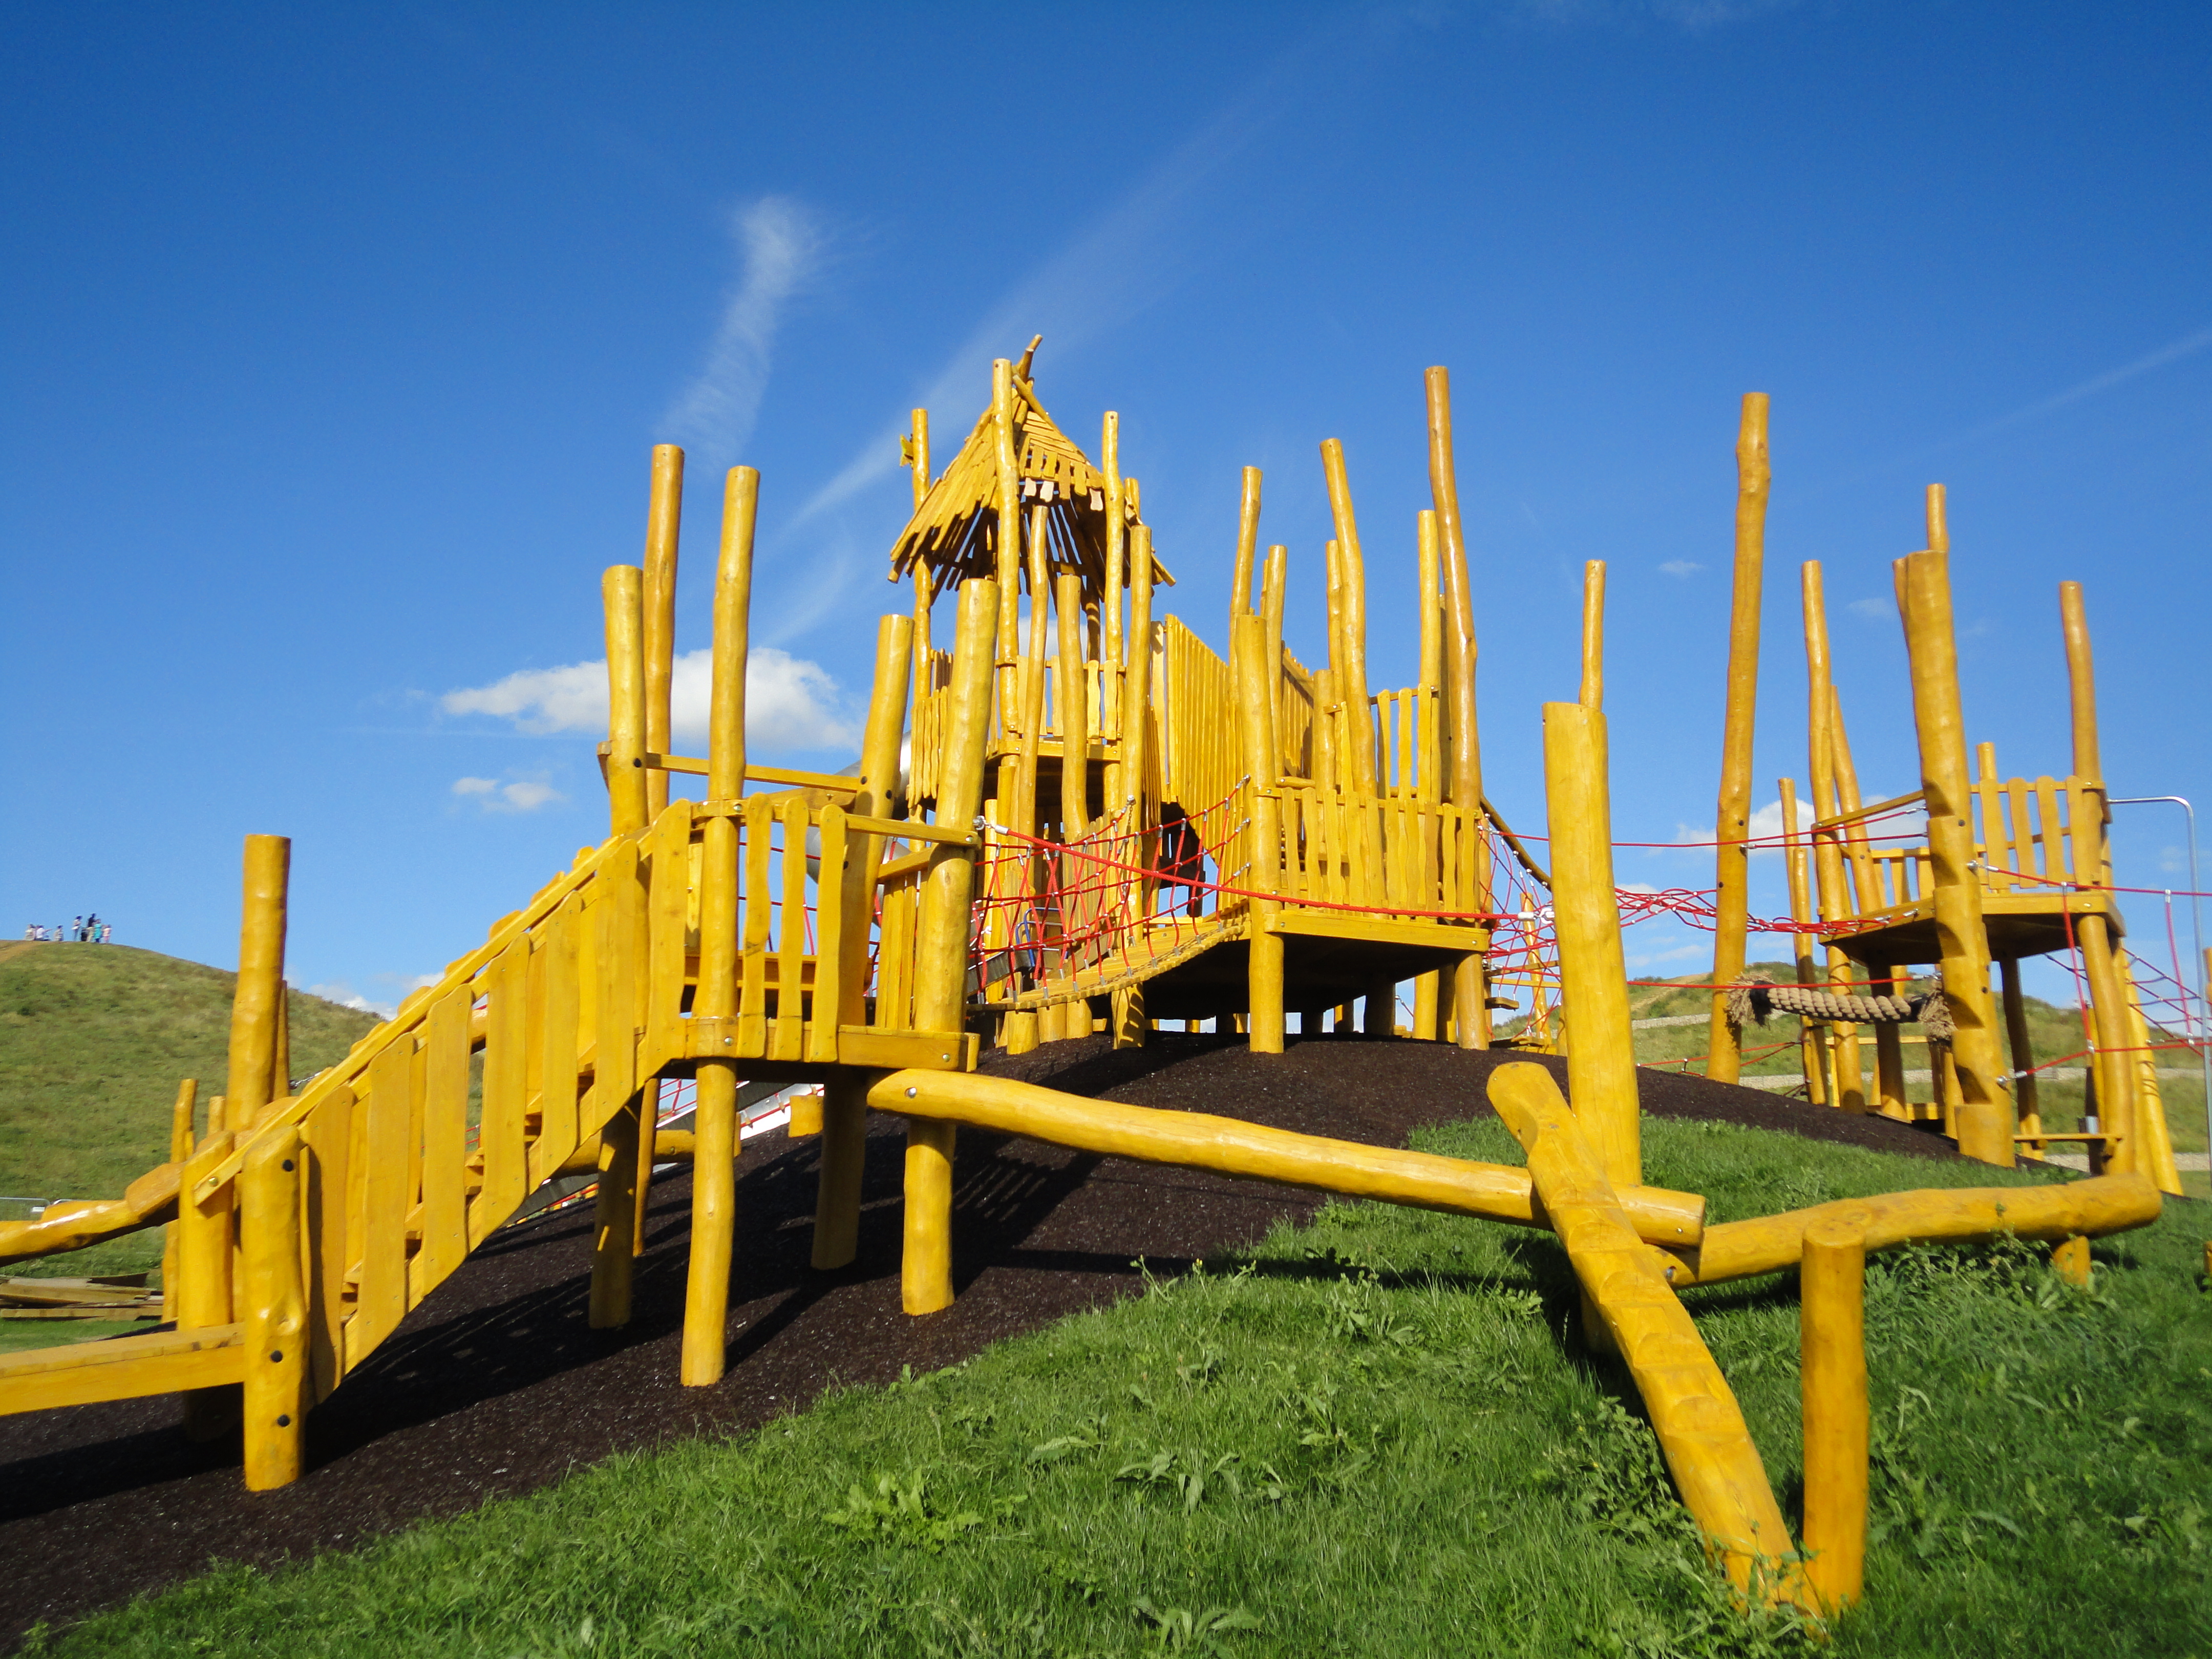 Playground for Northala Fields, located in London